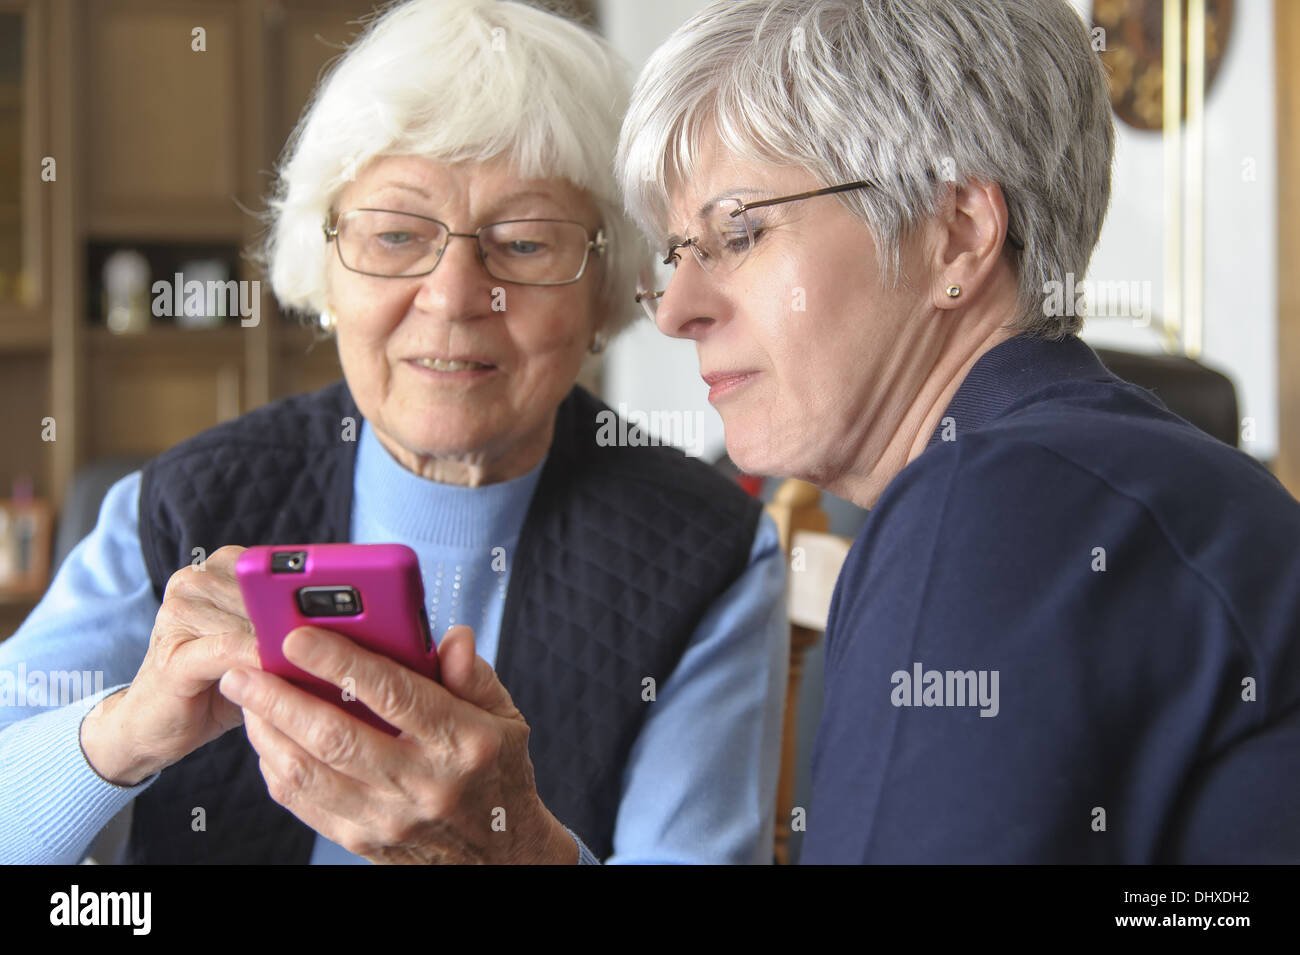 Two seniors with a smartphone Stock Photo